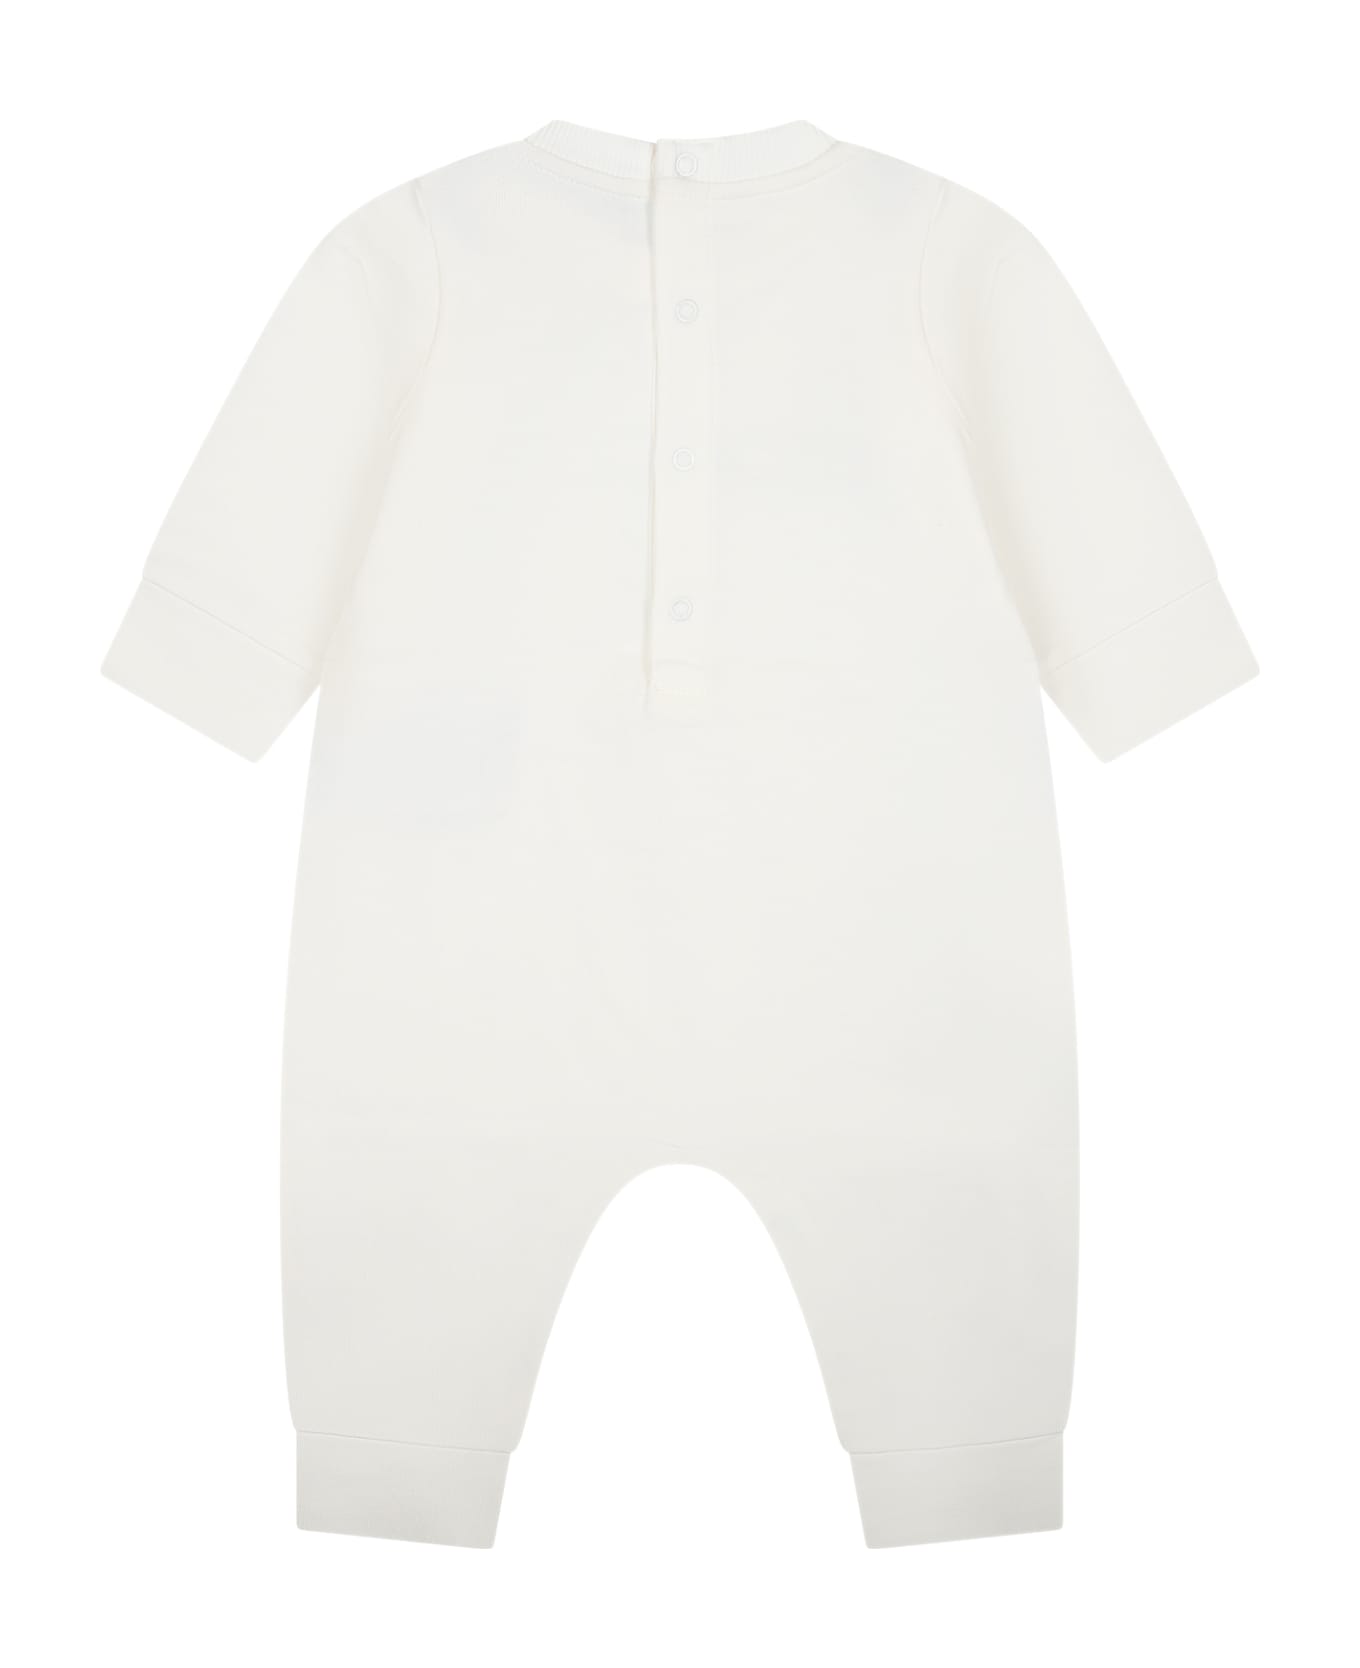 Moncler White Baby Jumpsuit With Logo - White ボディスーツ＆セットアップ